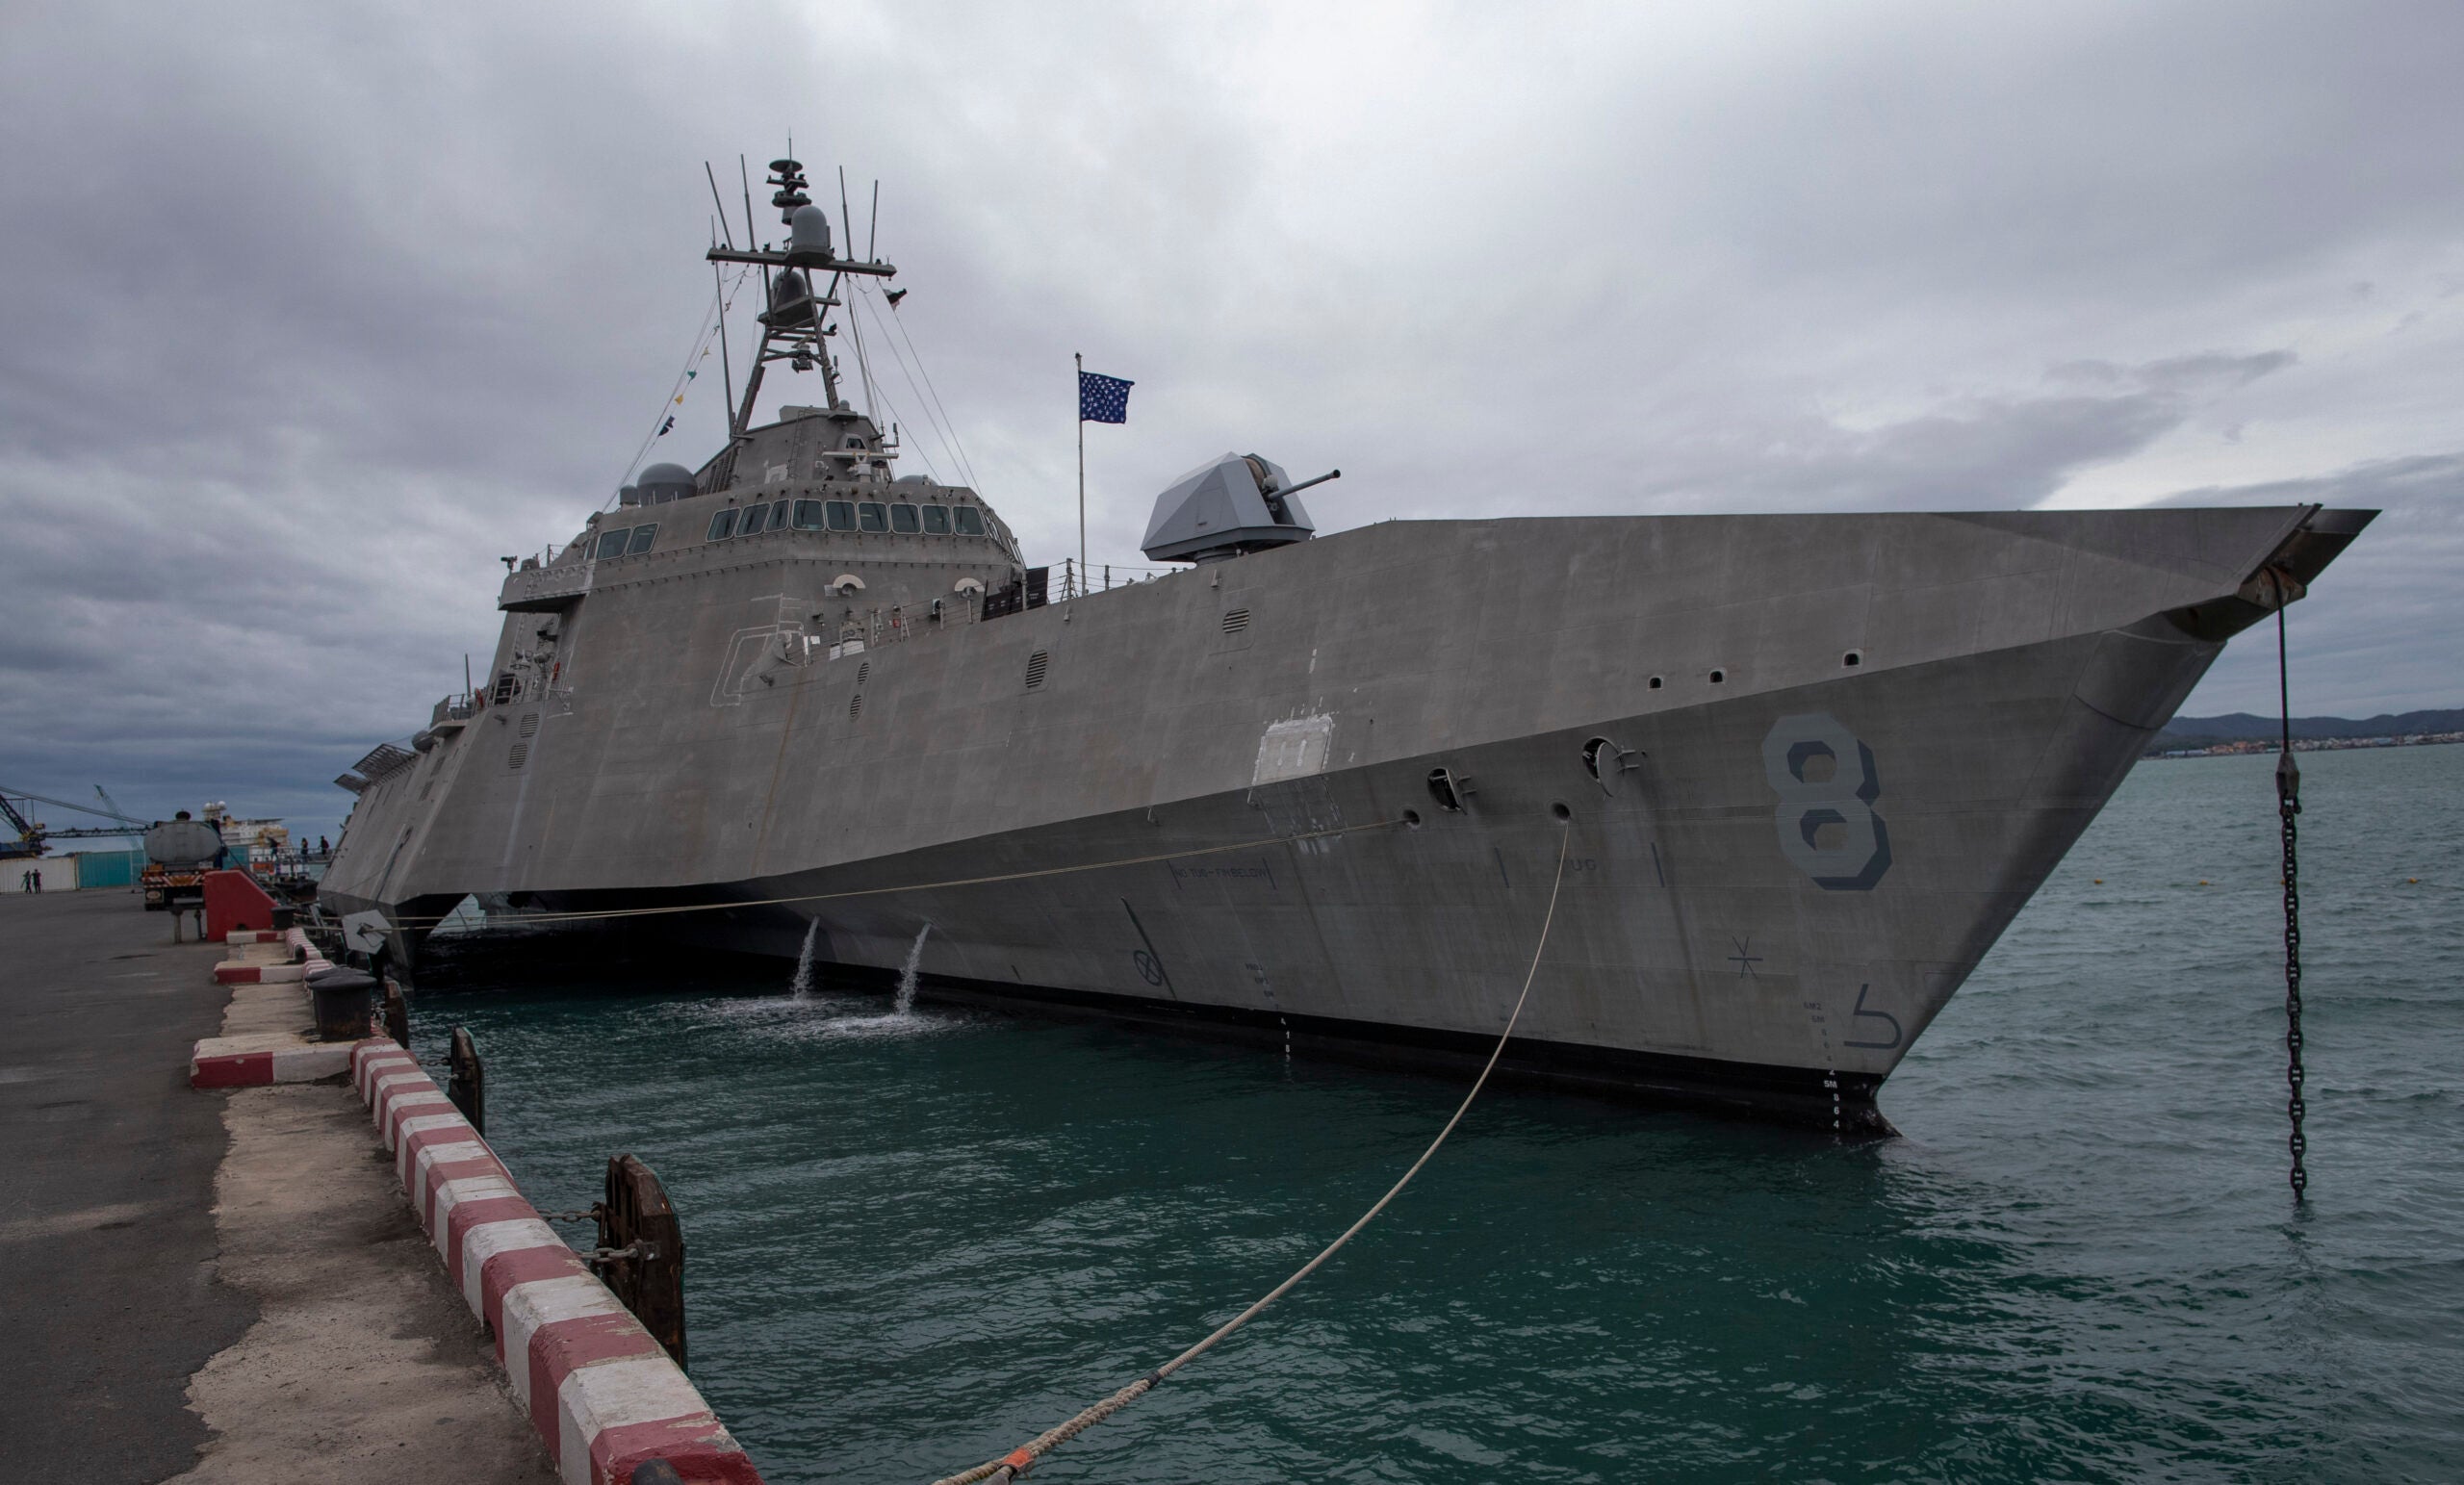 The USS Montgomery, one of the ships that will participate in Association of Southeast Asian Nations, ASEAN-U.S. Maritime Exercise is docked in Sattahip, Thailand, Monday, Sep. 2, 2019. (AP Photo/Gemunu Amarasinghe)